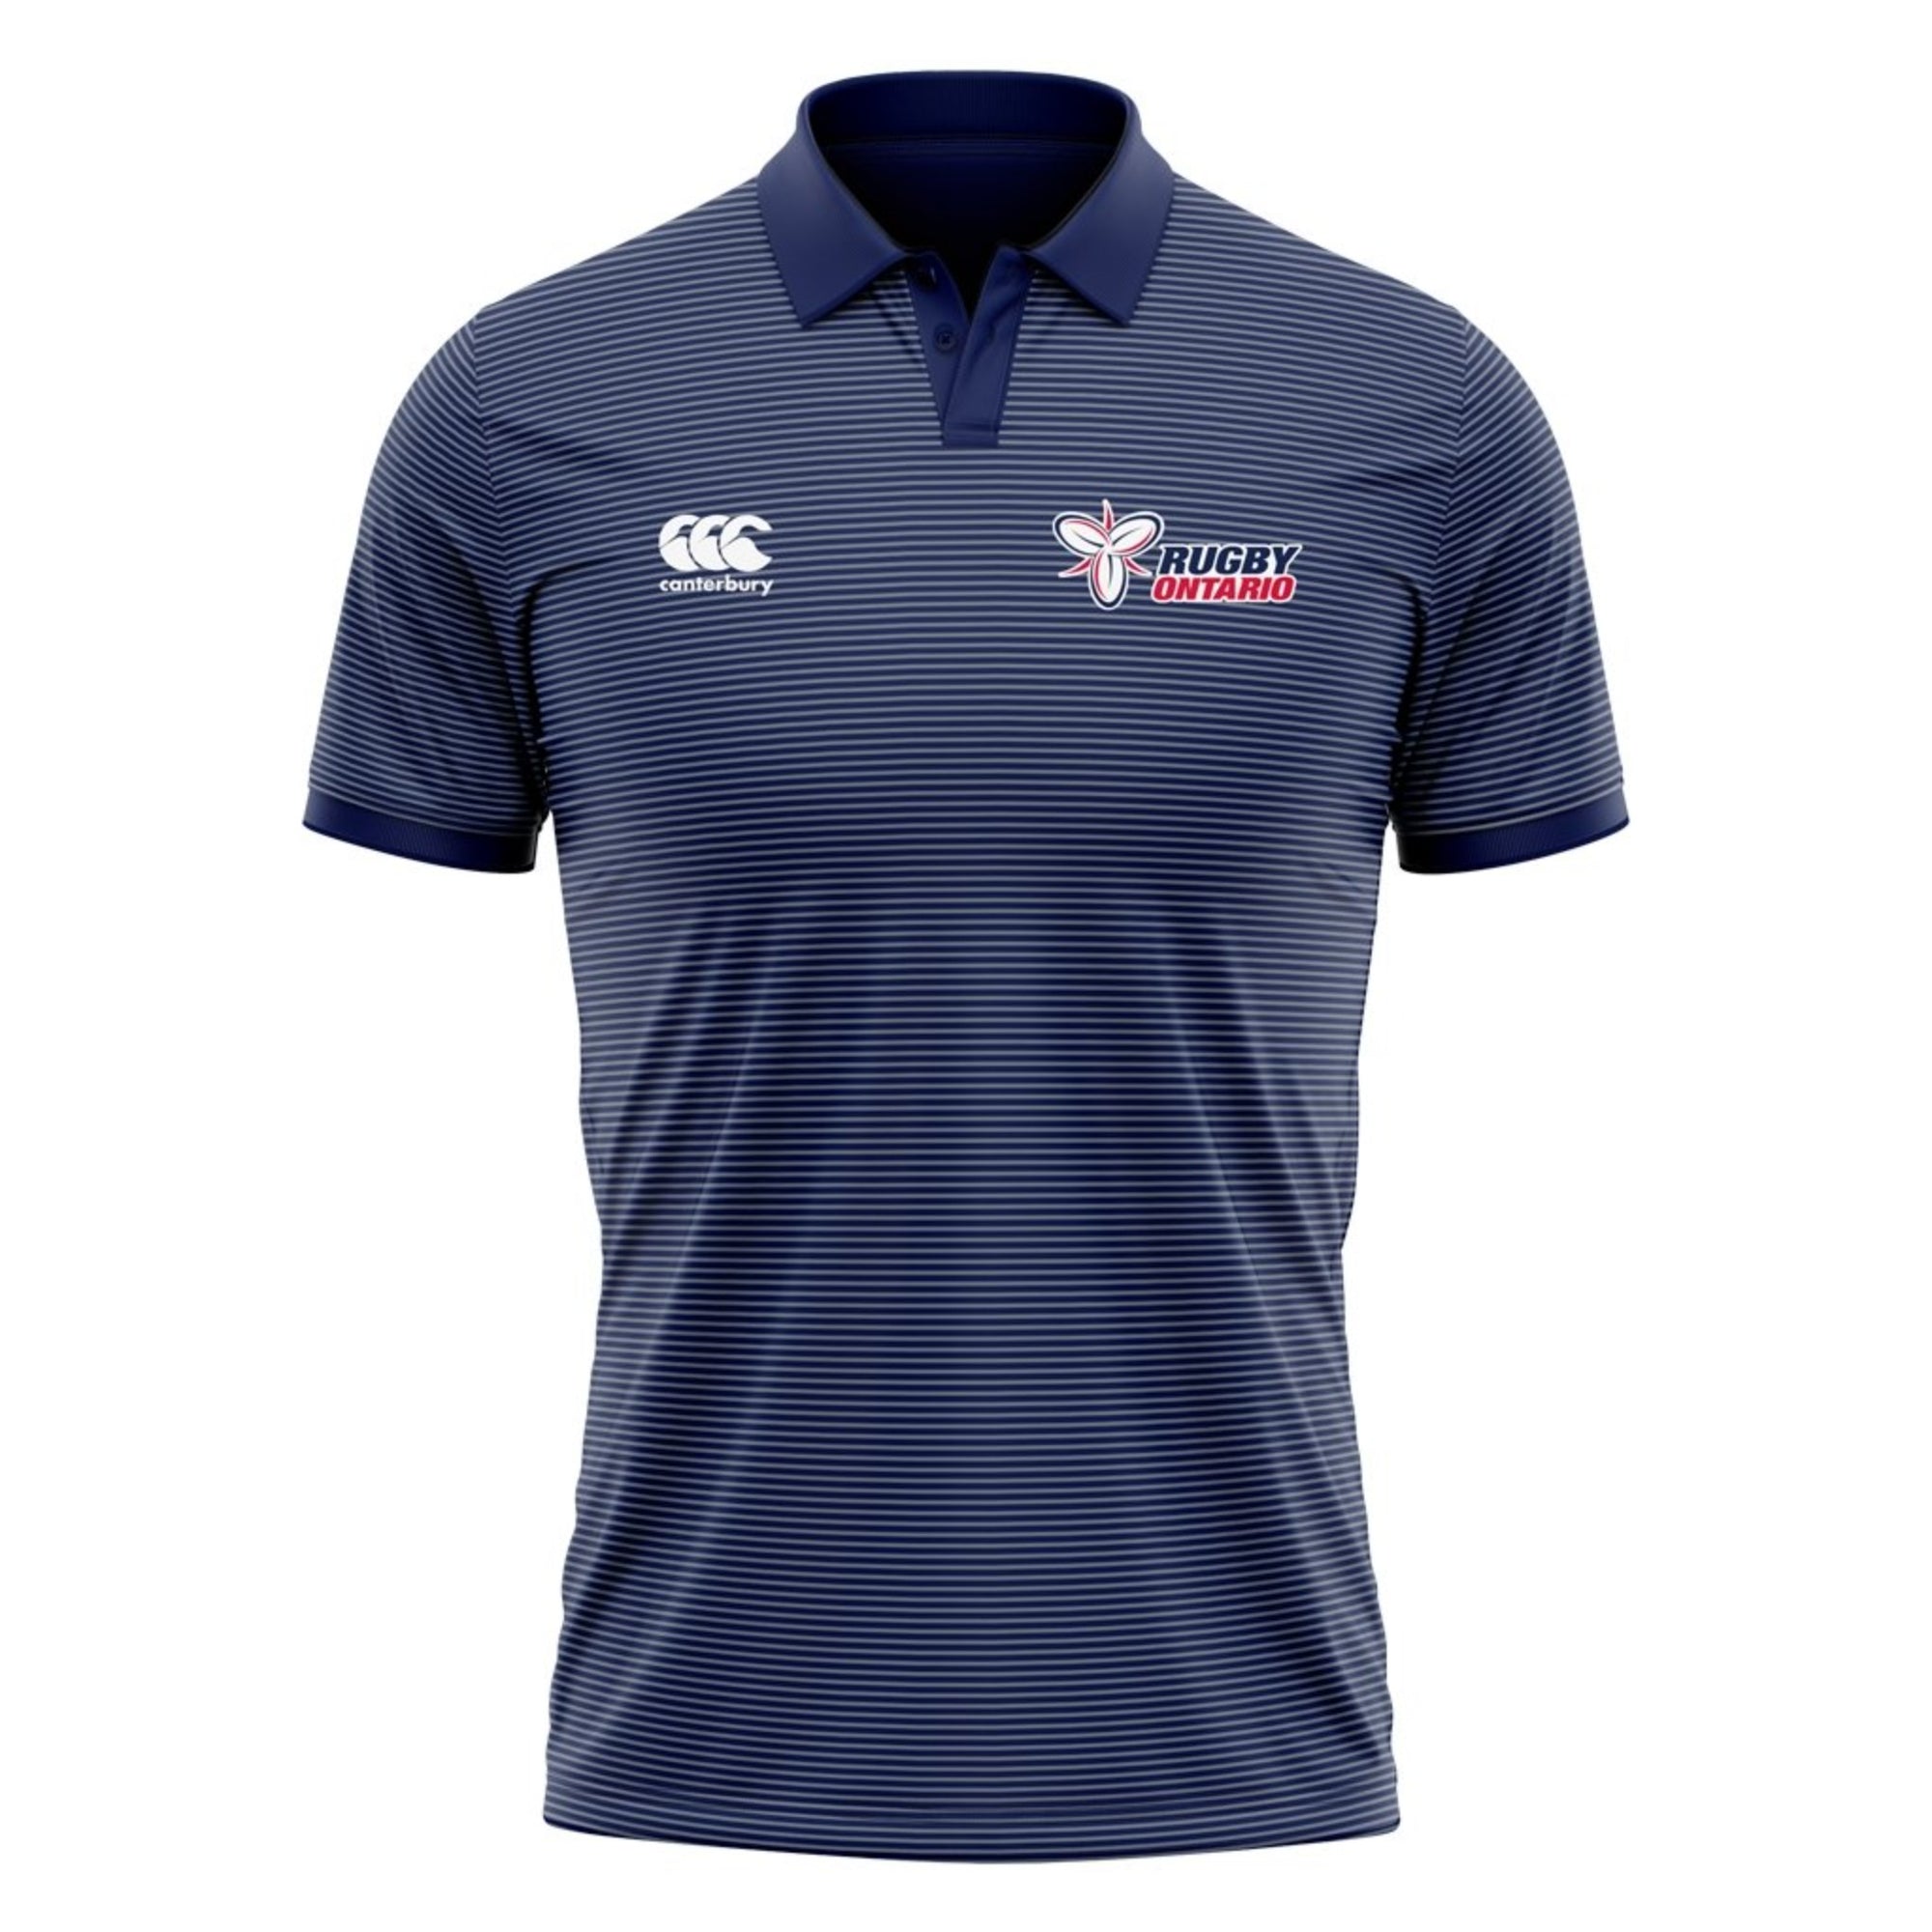 Rugby Ontario CCC Pinstripe Performance Polo - Men's - www.therugbyshop.com www.therugbyshop.com MEN'S / NAVY / XS MUDOO POLO Rugby Ontario CCC Pinstripe Performance Polo - Men's